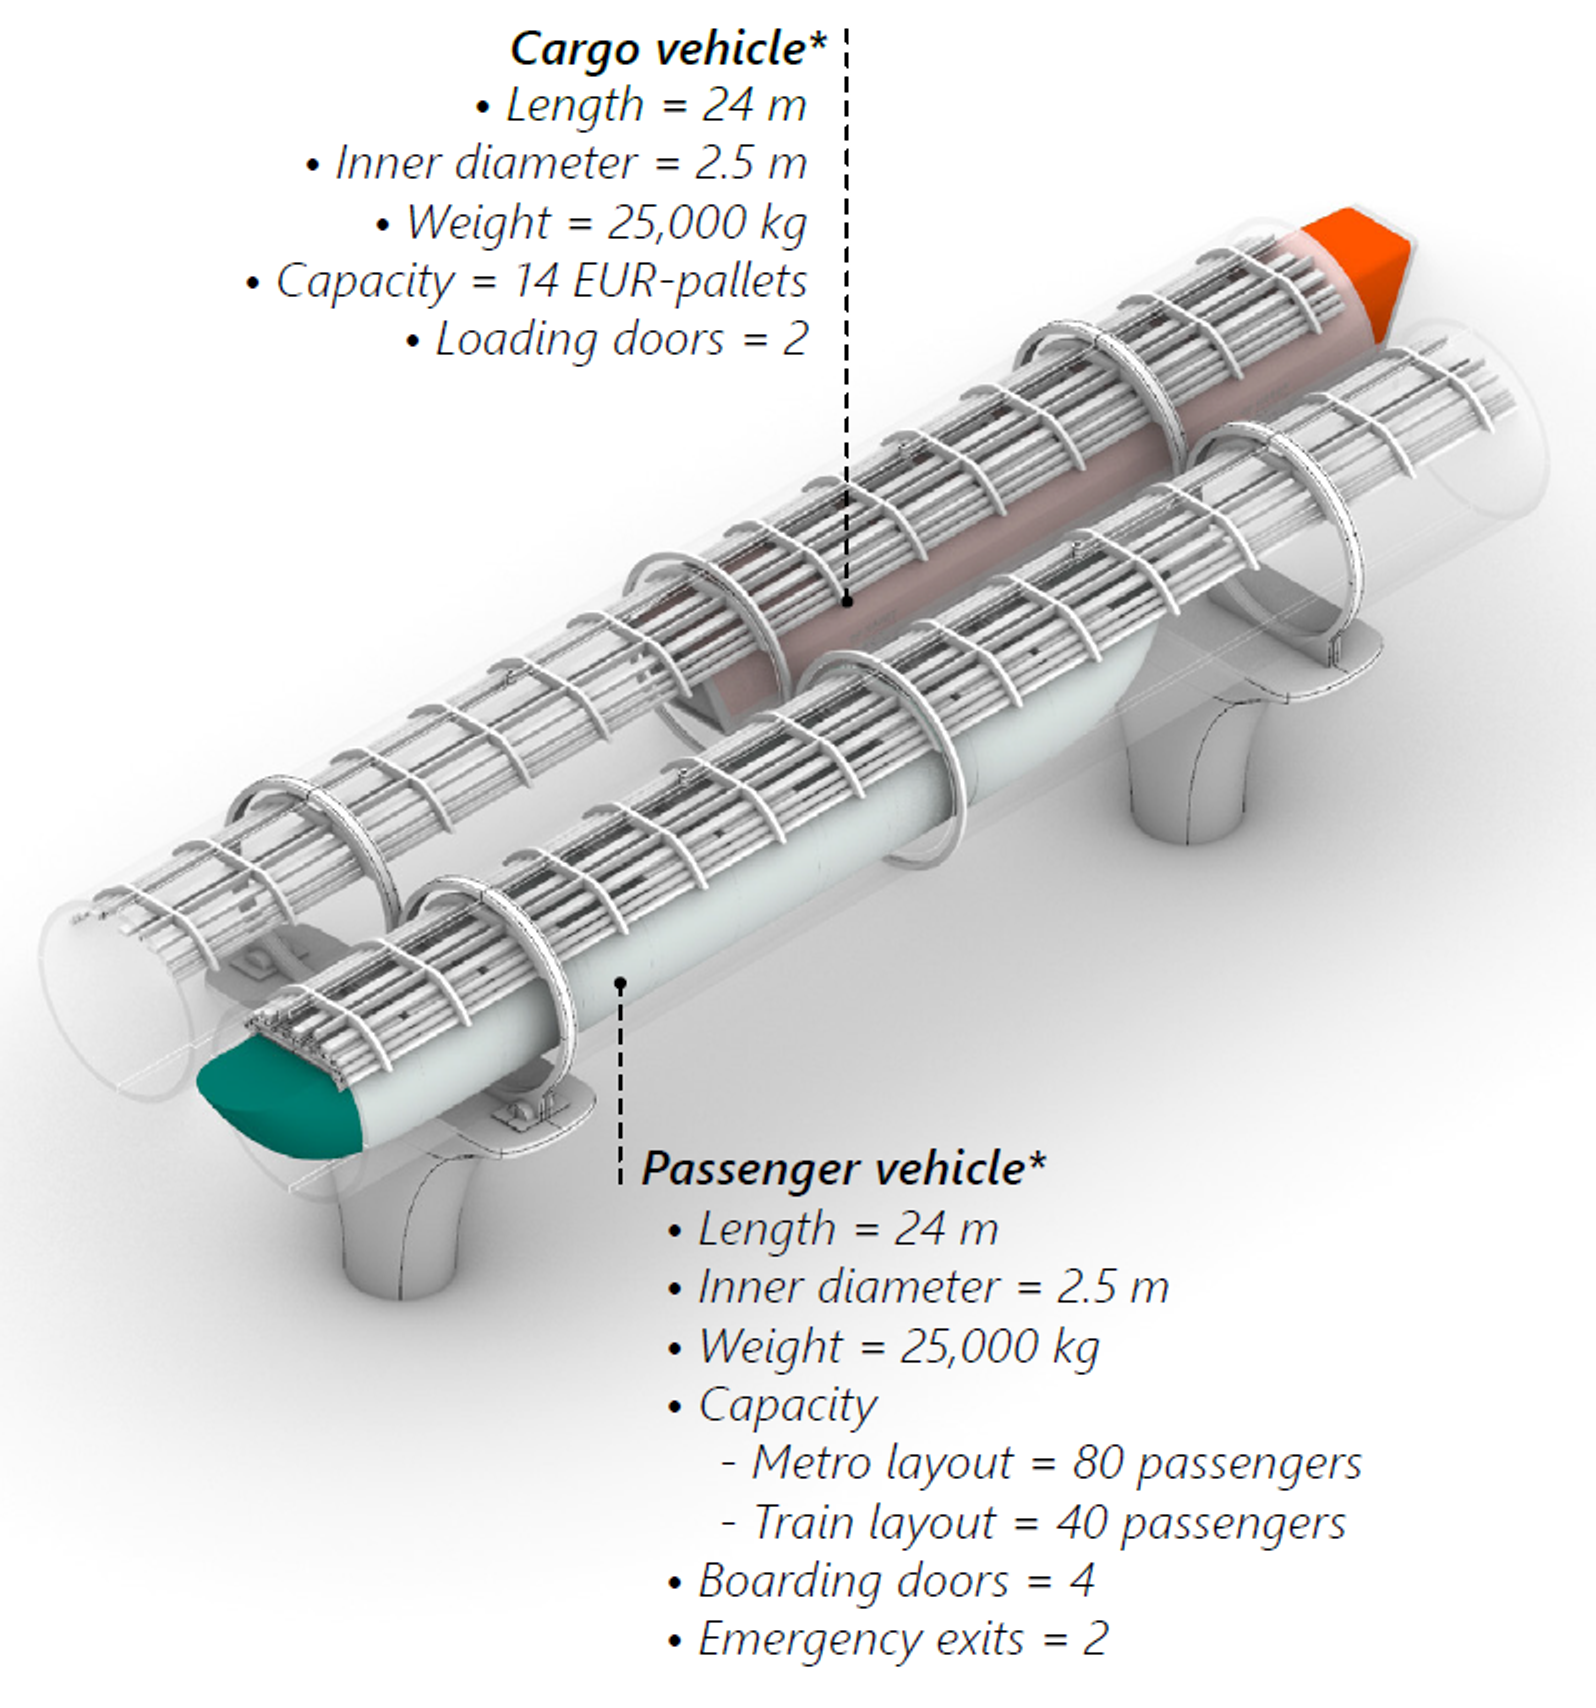 Figure 1: A conceptual model visualizing the passenger and cargo vehicle inside a guideway. 
*The values presented are indicative for a specific reference design. 